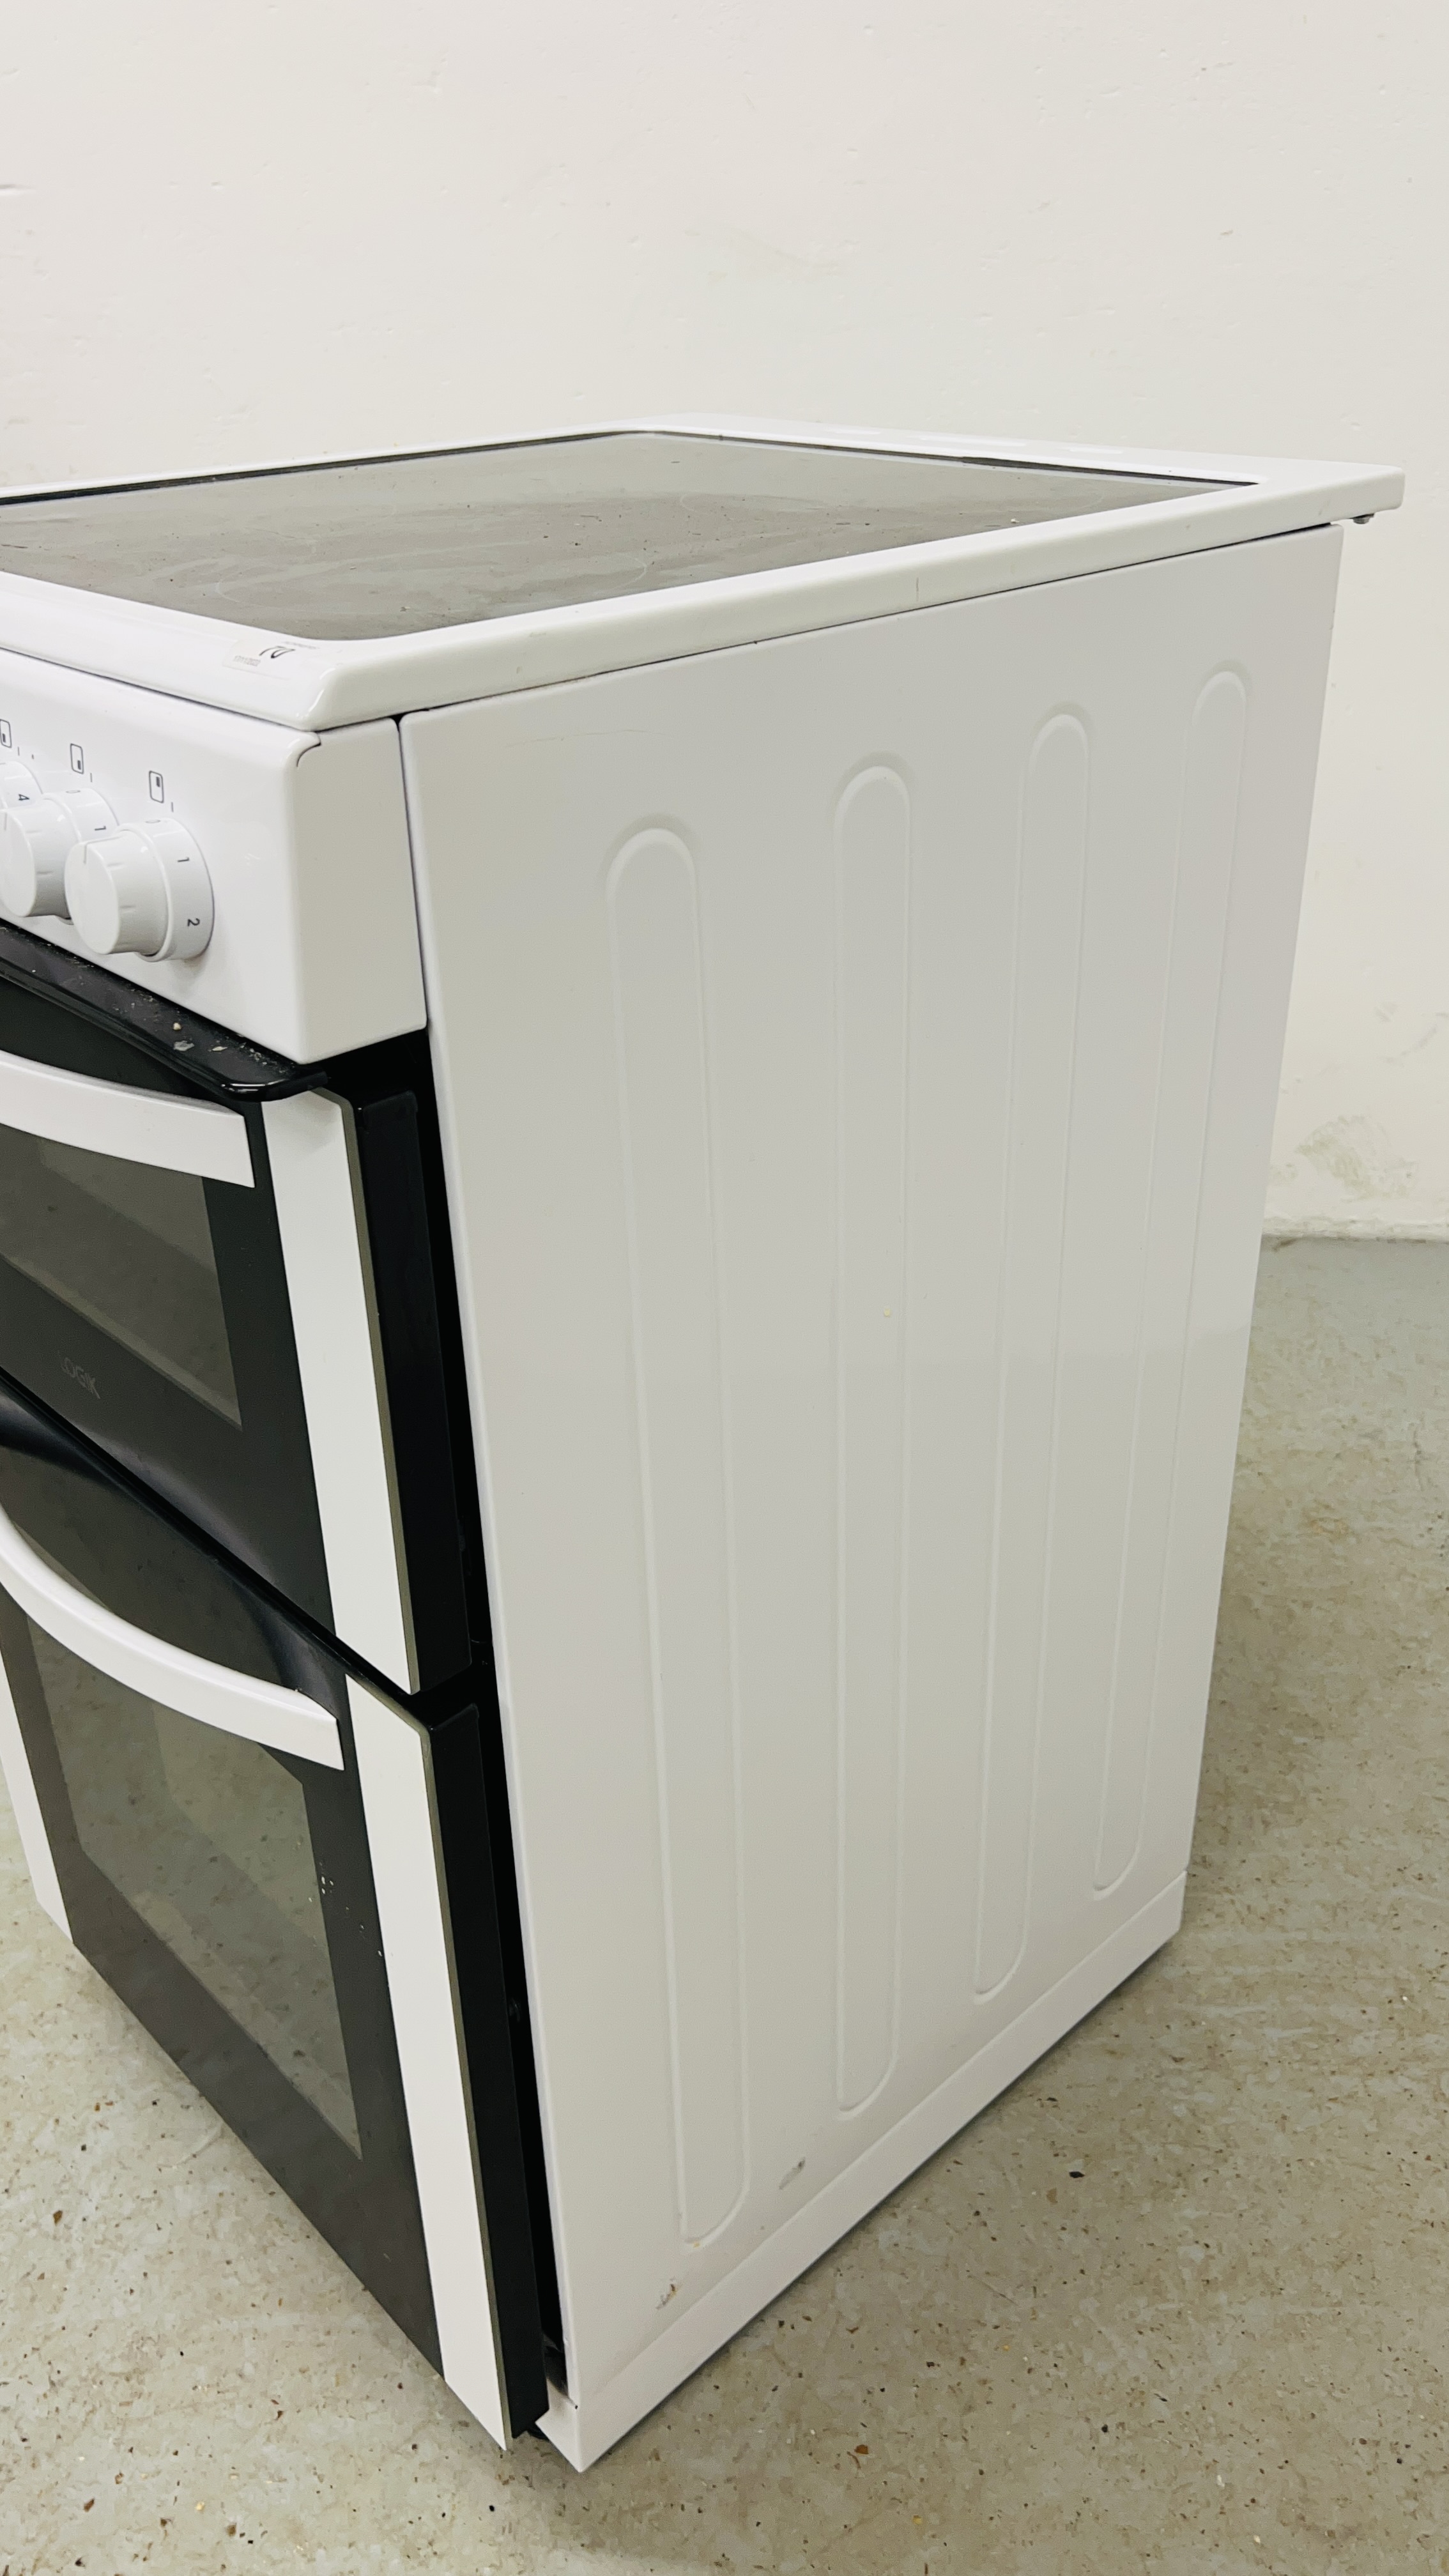 LOGIK ELECTRIC OVEN - SOLD AS SEEN. - Image 5 of 10